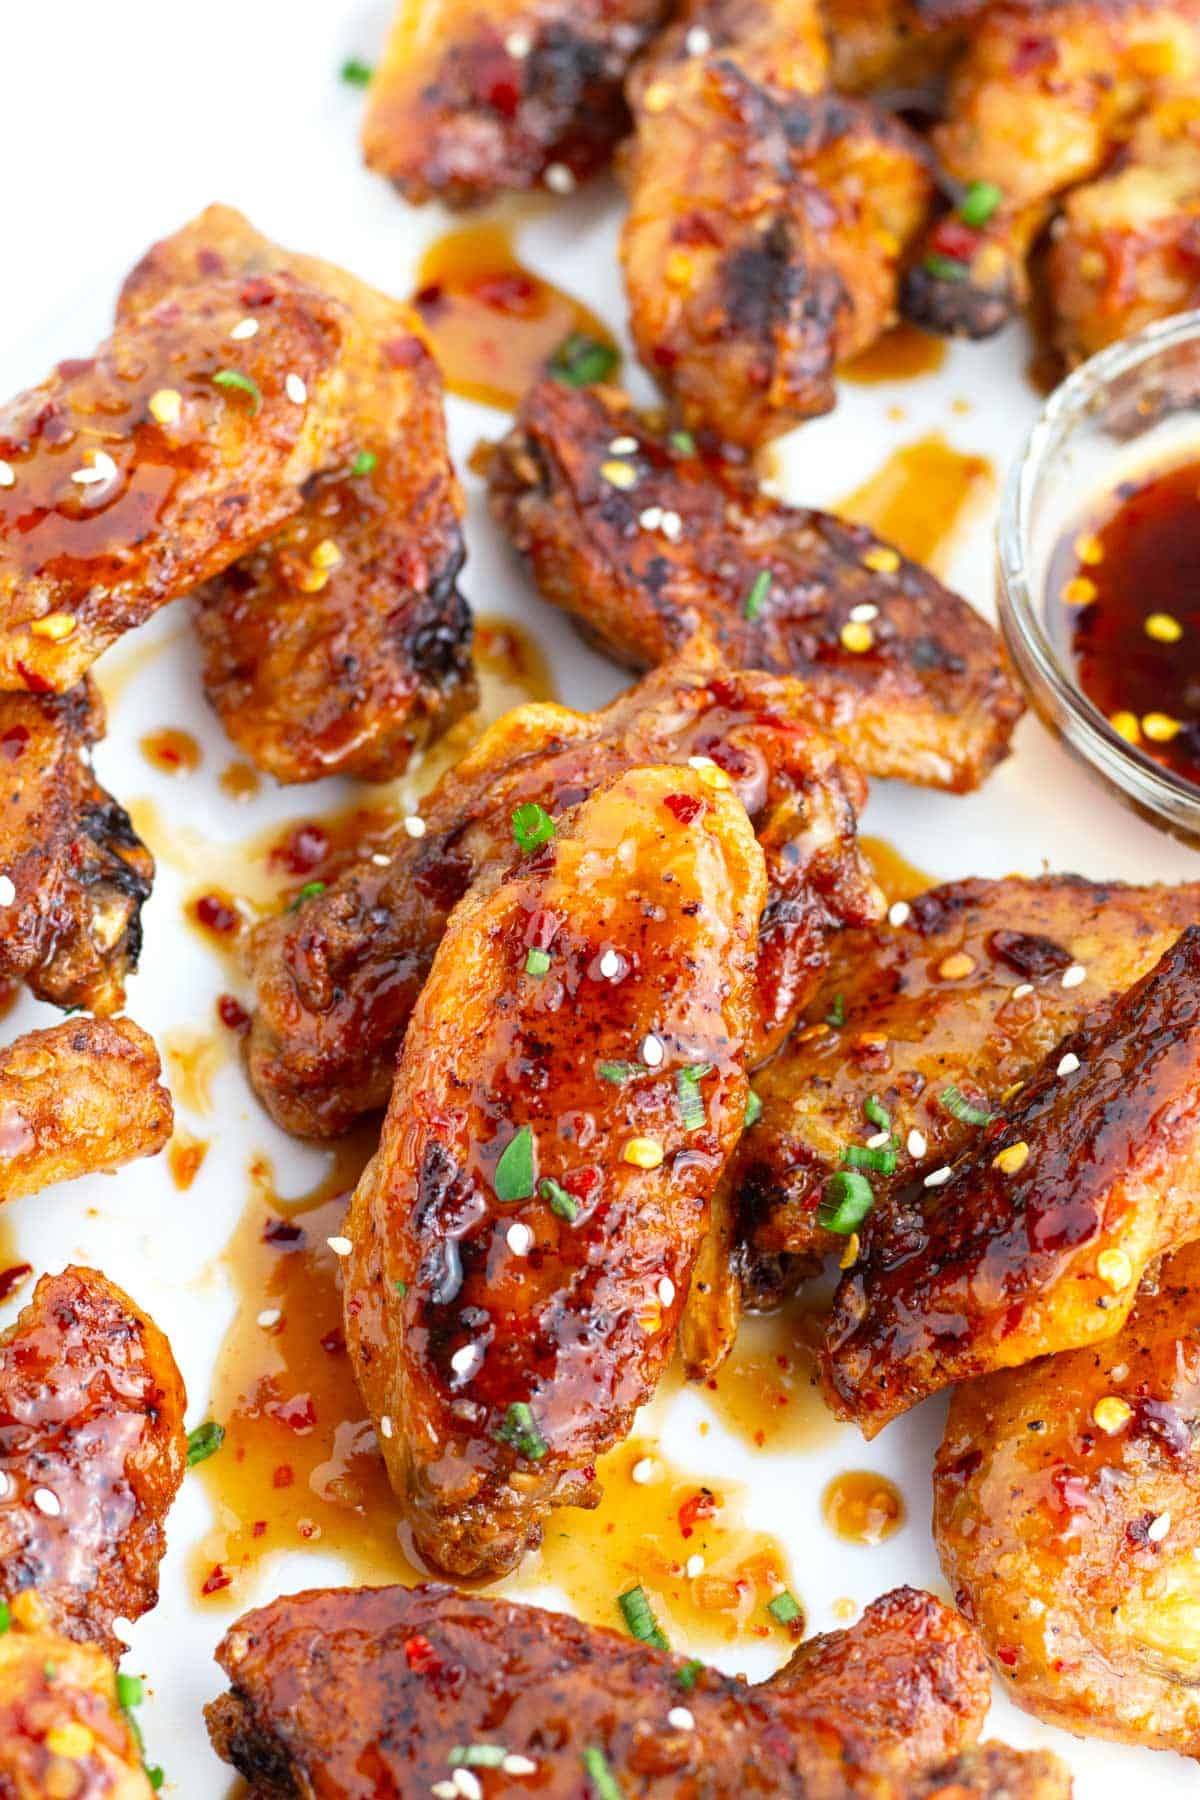 Chicken wings covered in a sweet chili sauce sprinkled with green onions.